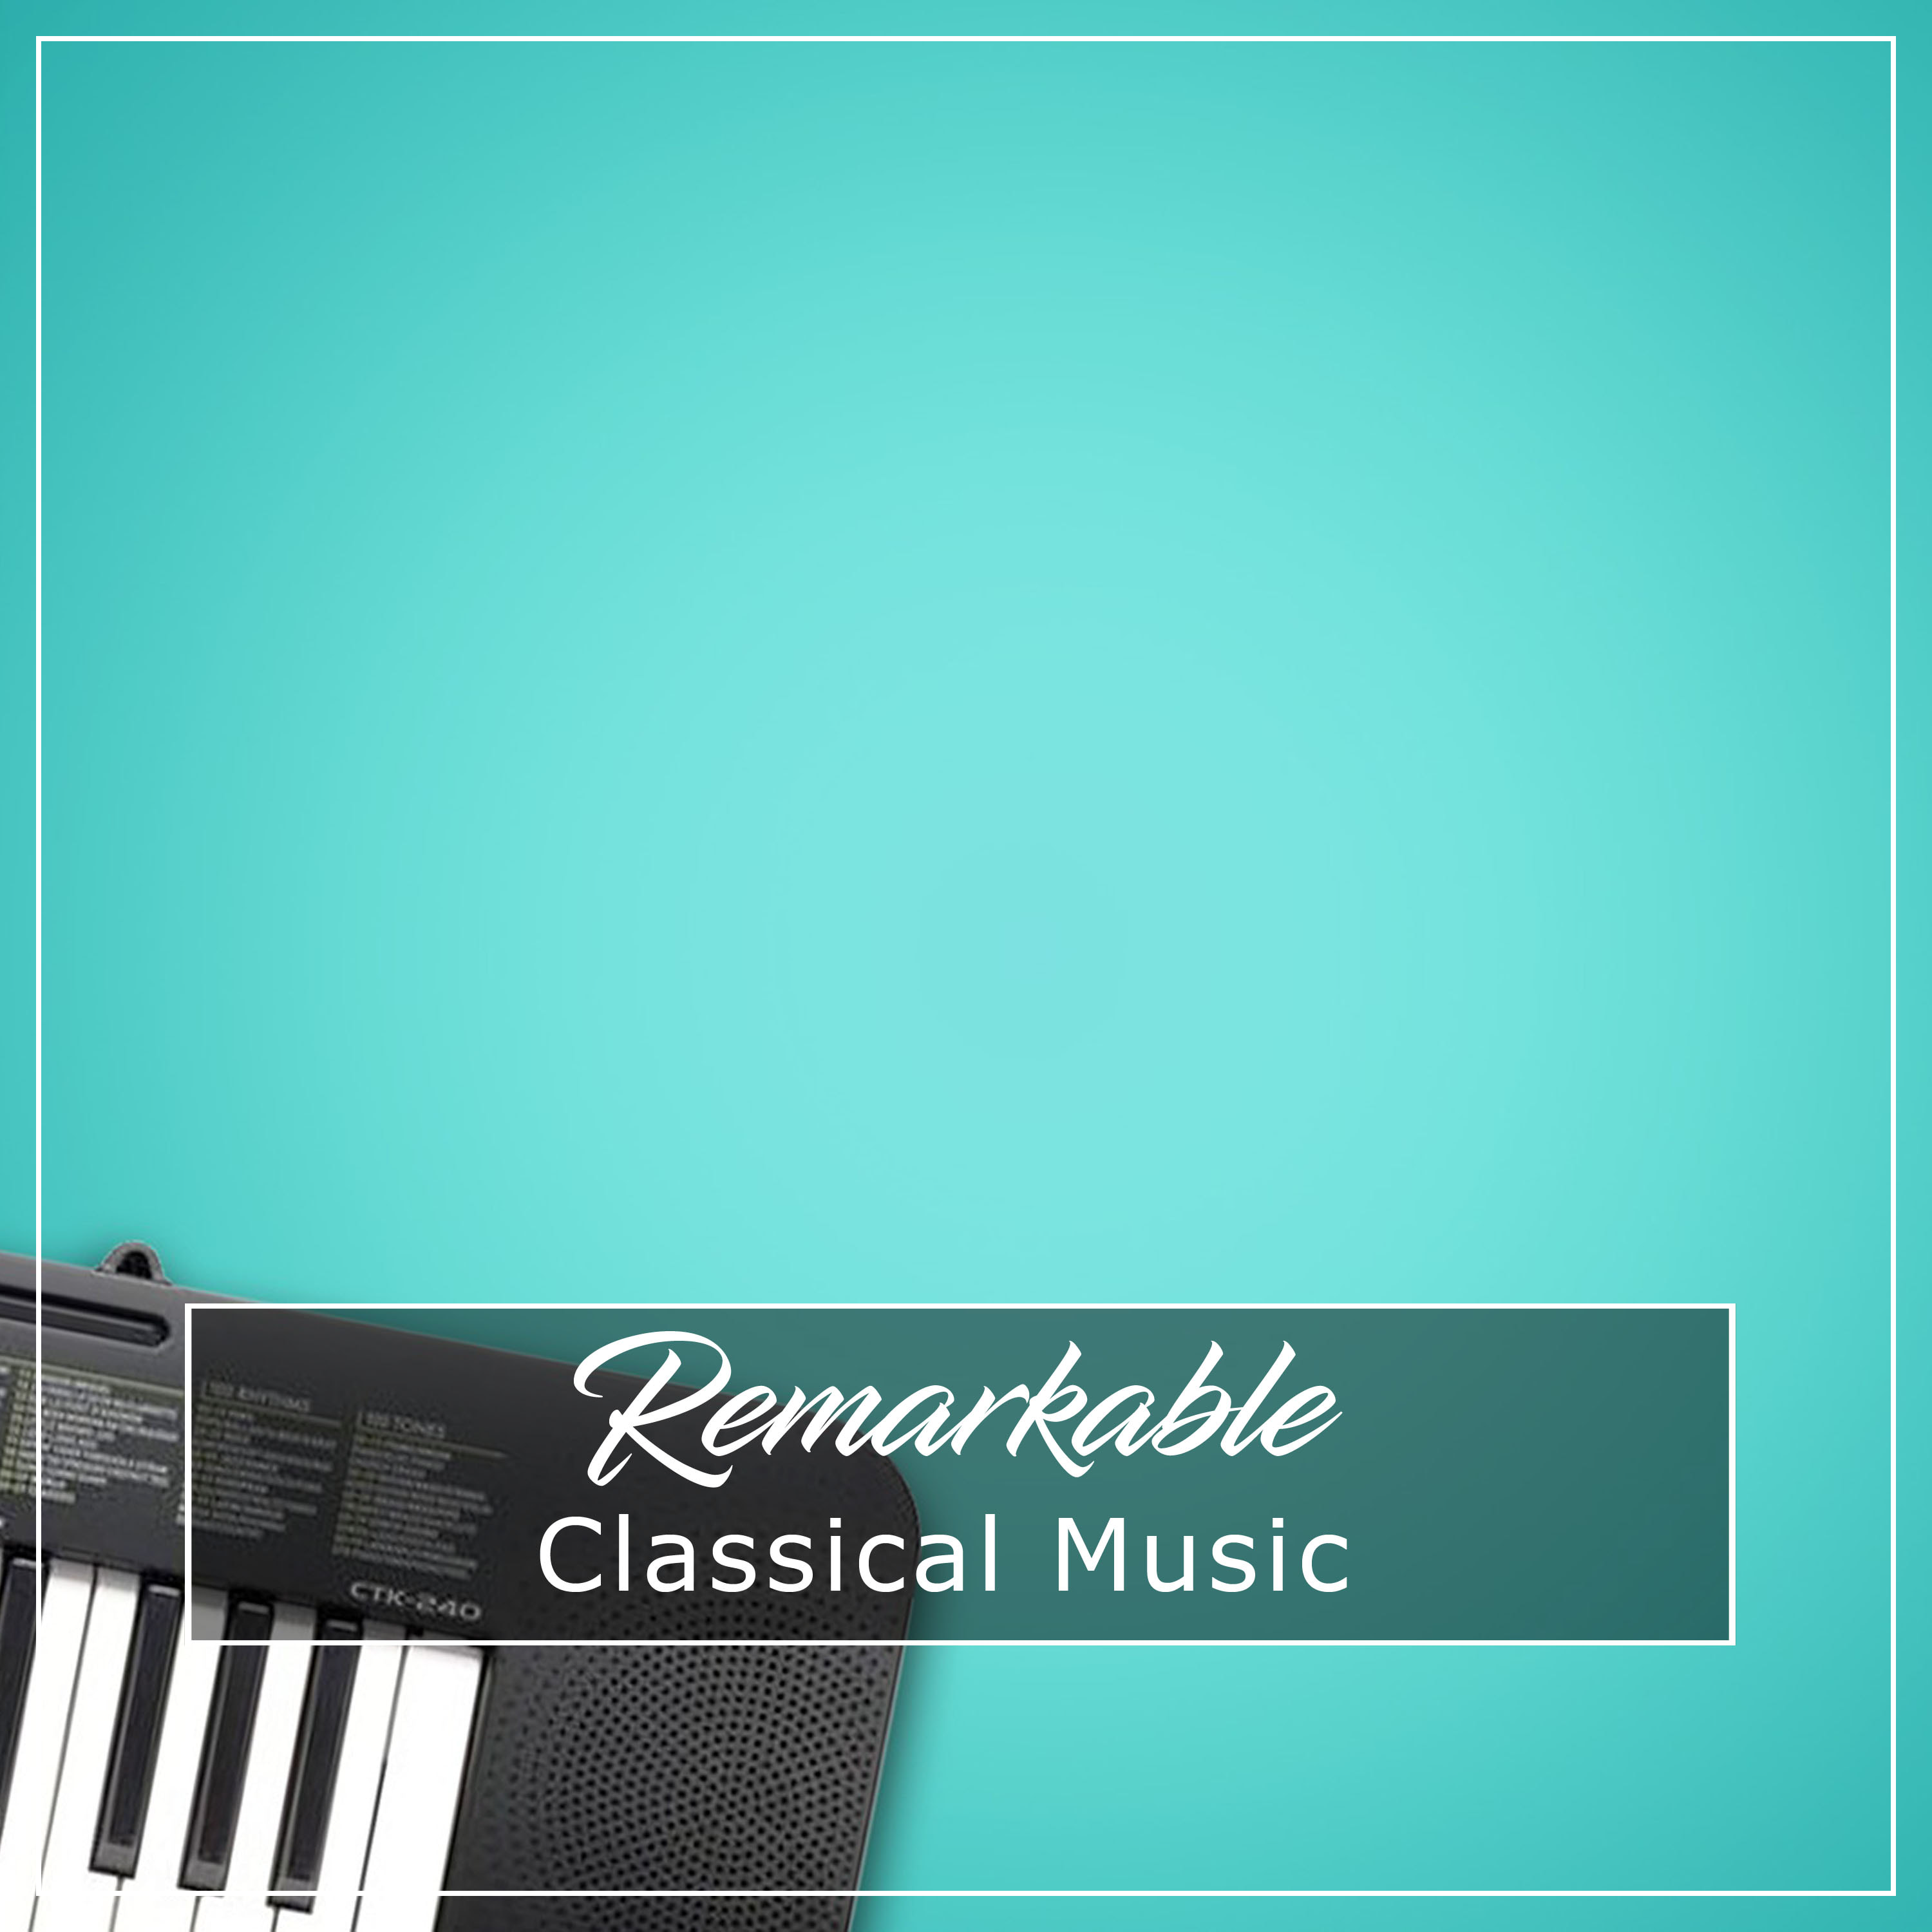 #19 Remarkable Classical Music